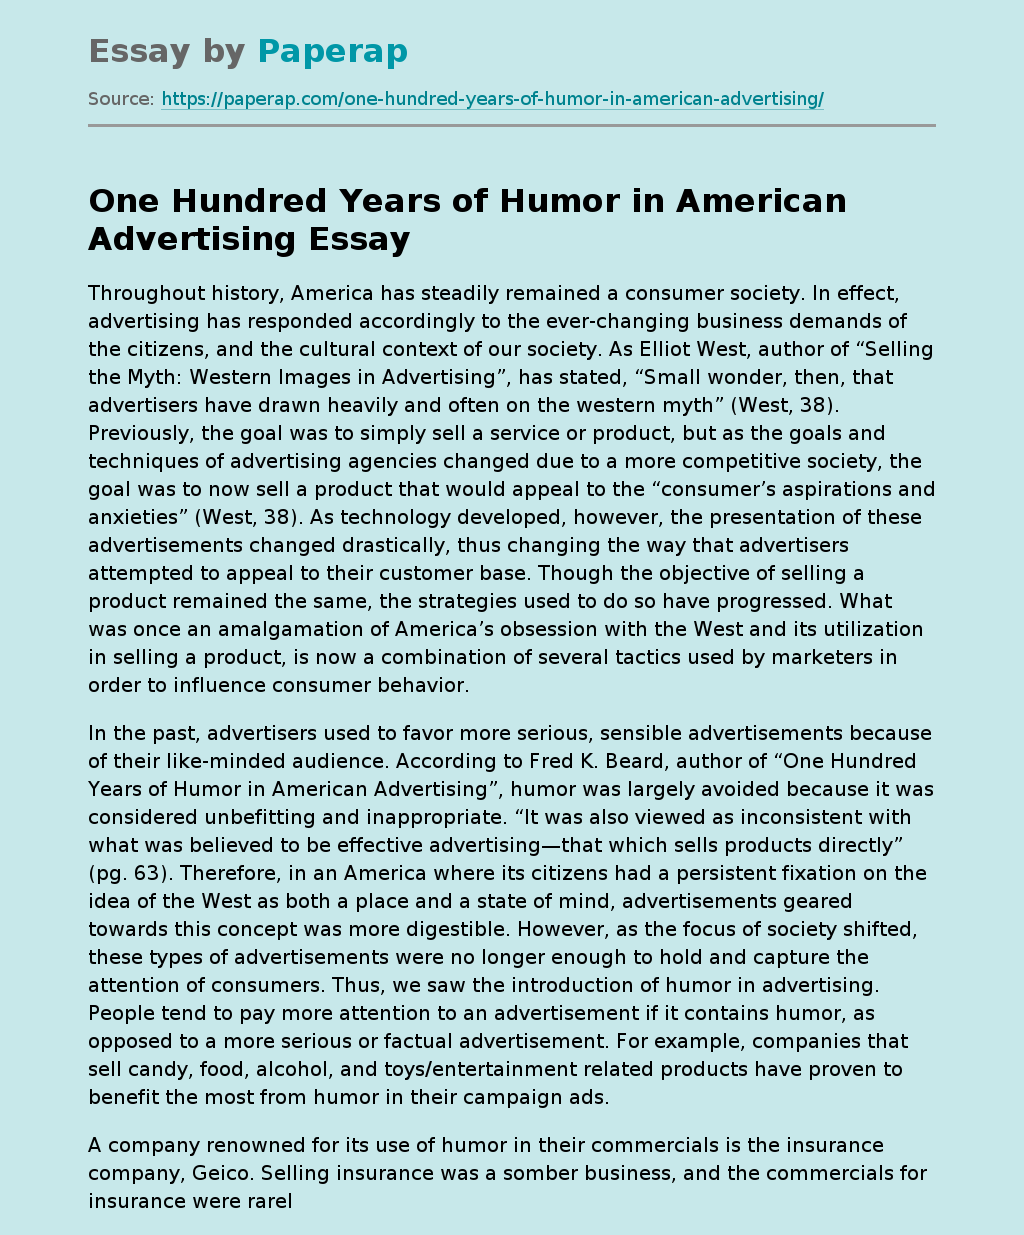 One Hundred Years of Humor in American Advertising